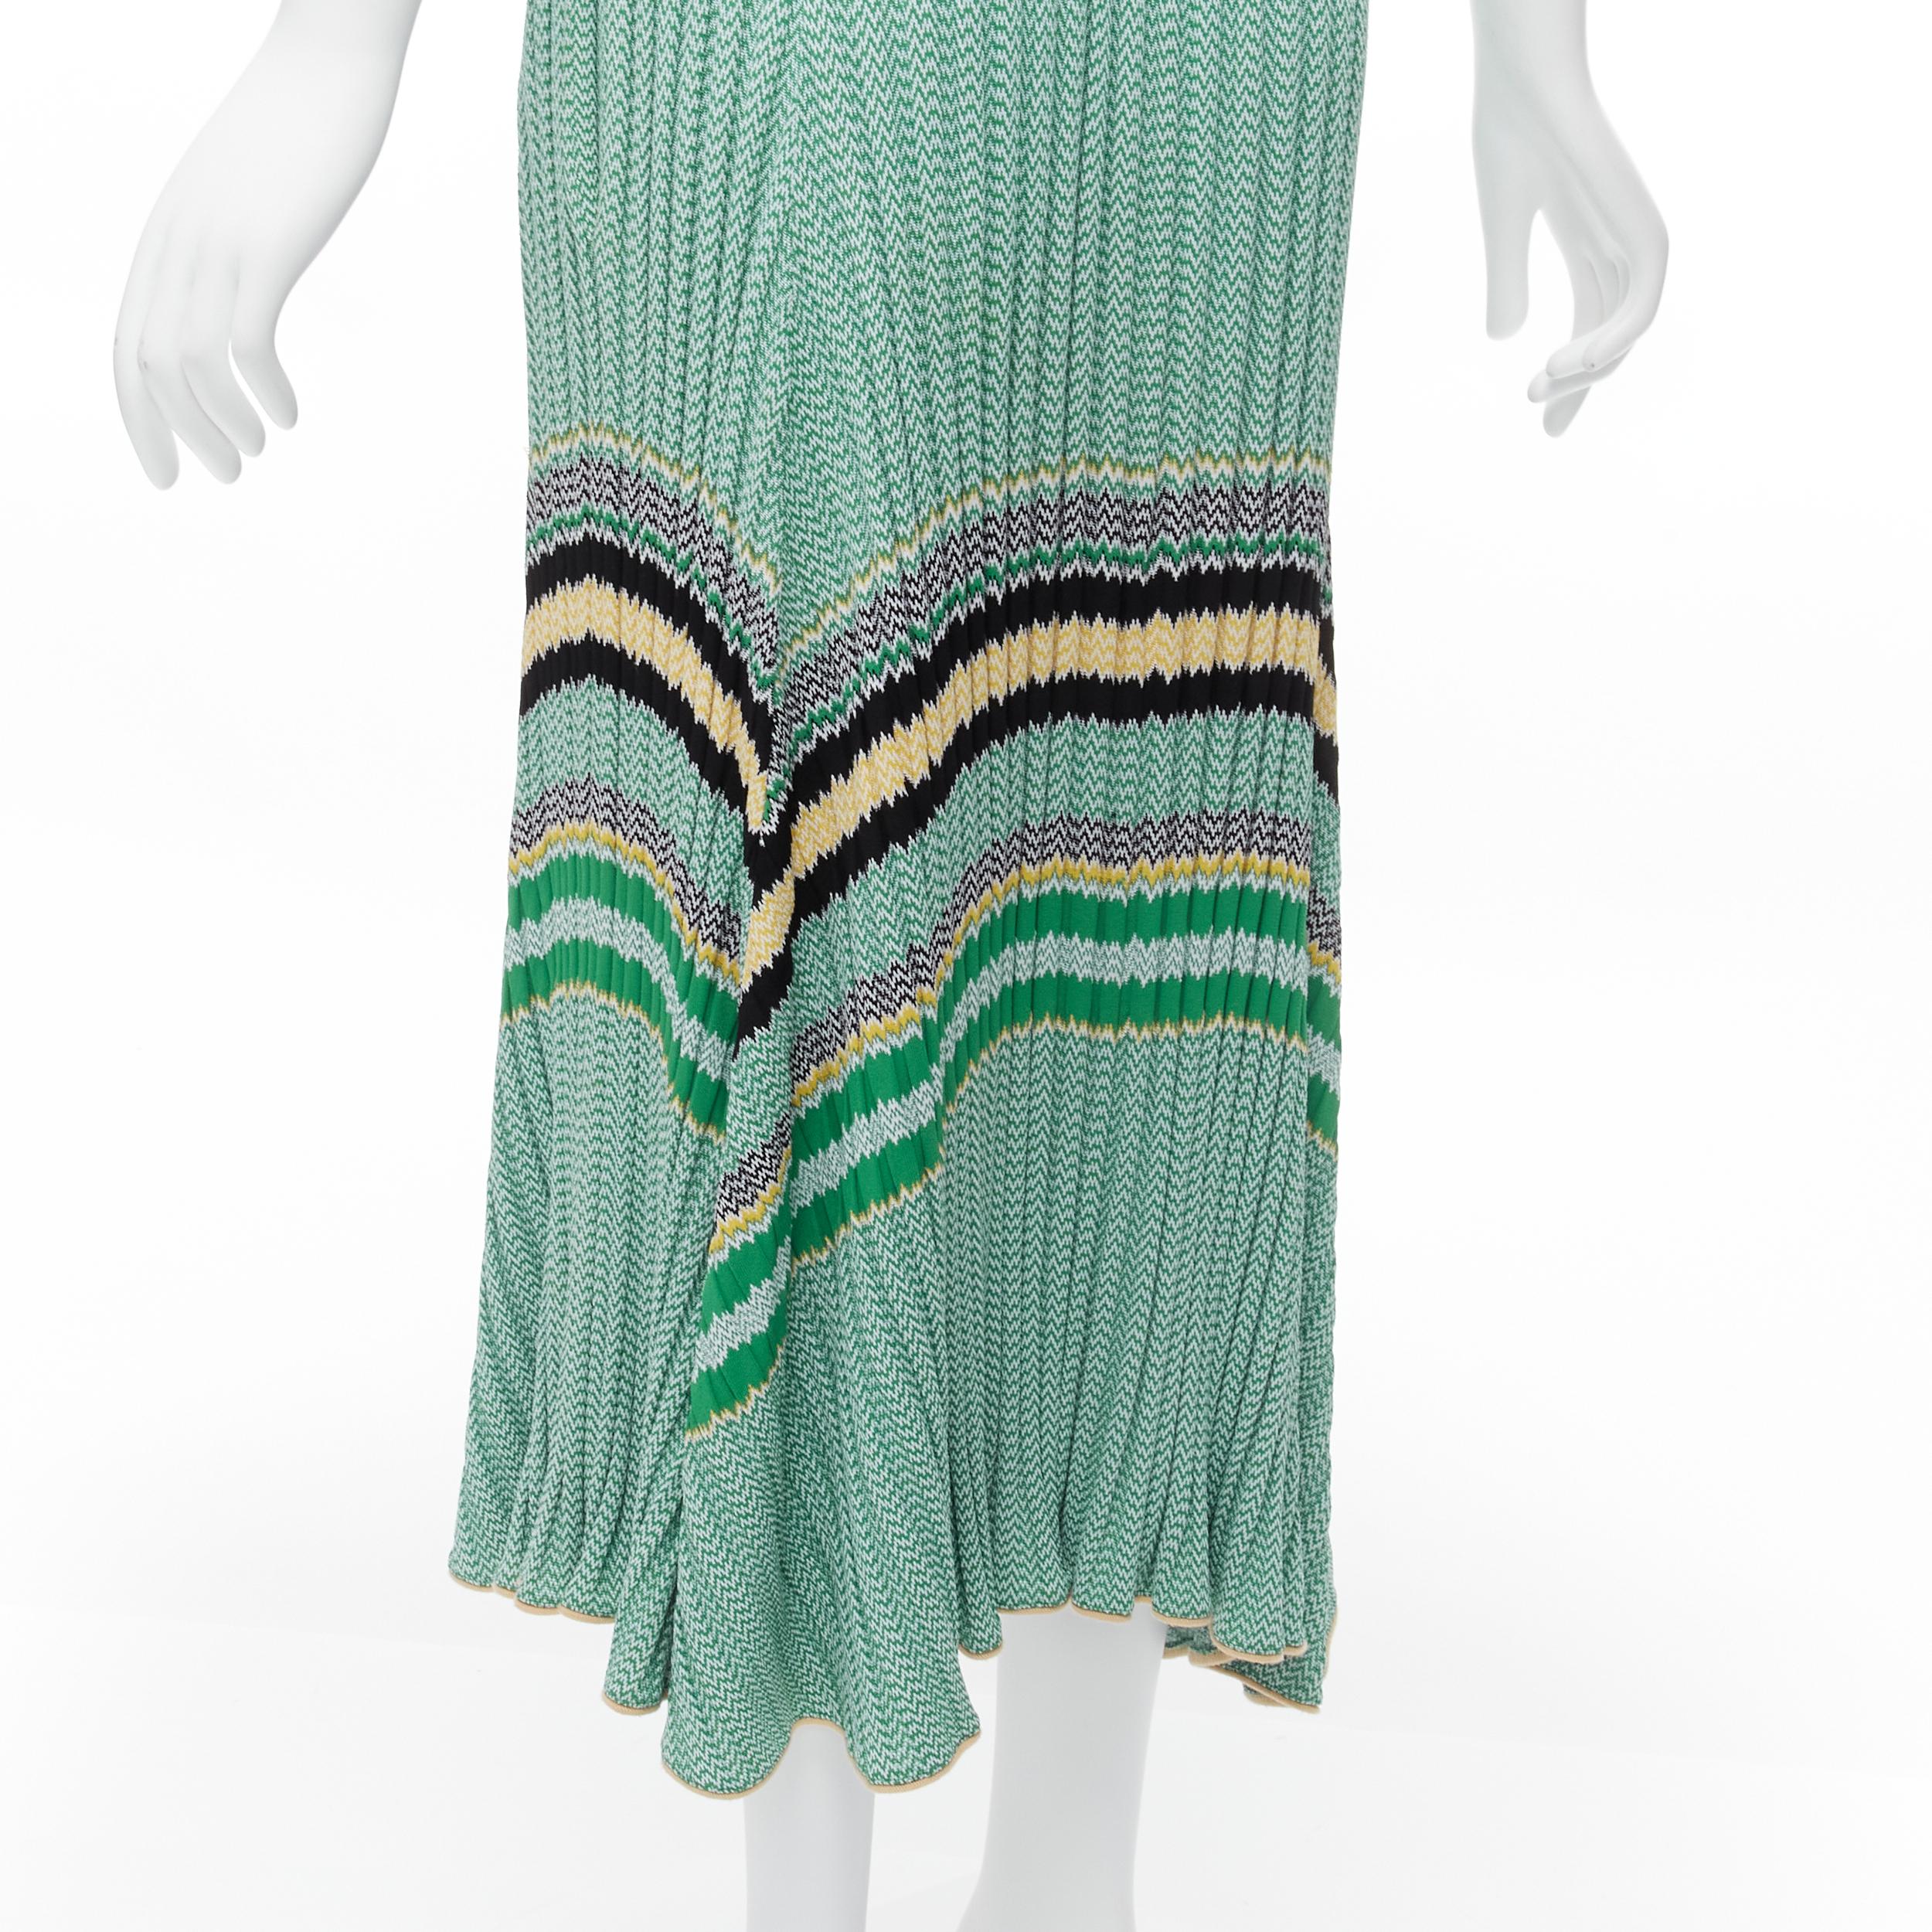 OLD CELINE Phoebe Philo 2015 Runway green varsity stripes contour ribbed midi skirt S
Reference: TGAS/D00227
Brand: Celine
Designer: Phoebe Philo
Collection: 2015 - Runway
Material: Viscose, Elastane, Polyester
Color: Green, Yellow
Pattern: